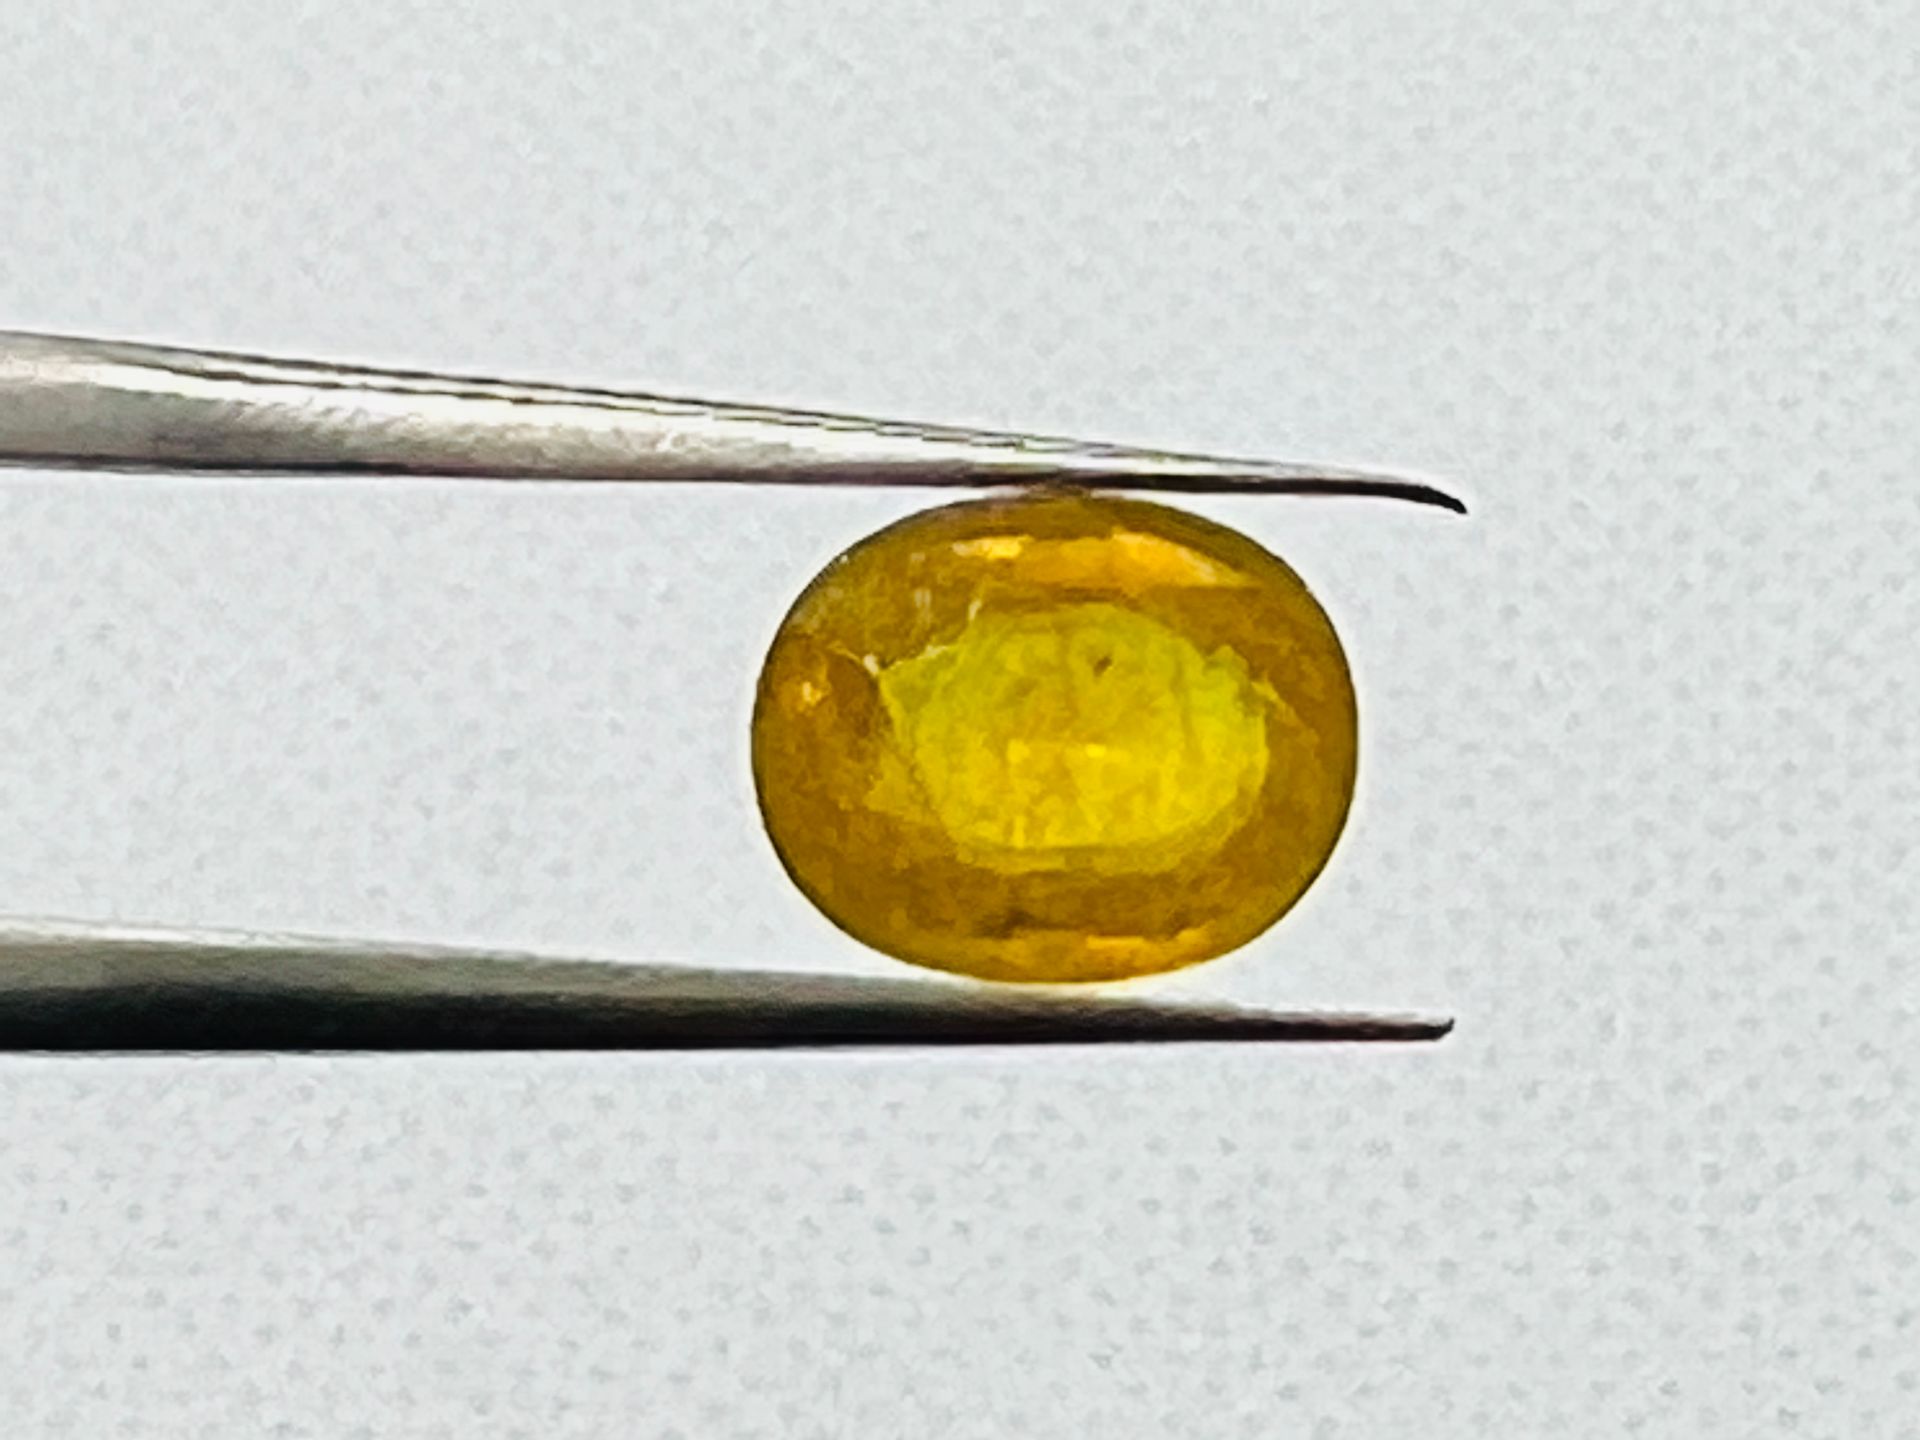 SAPHIRE YELLOW SAPHIRE of 1.98 carat AIGT certificate